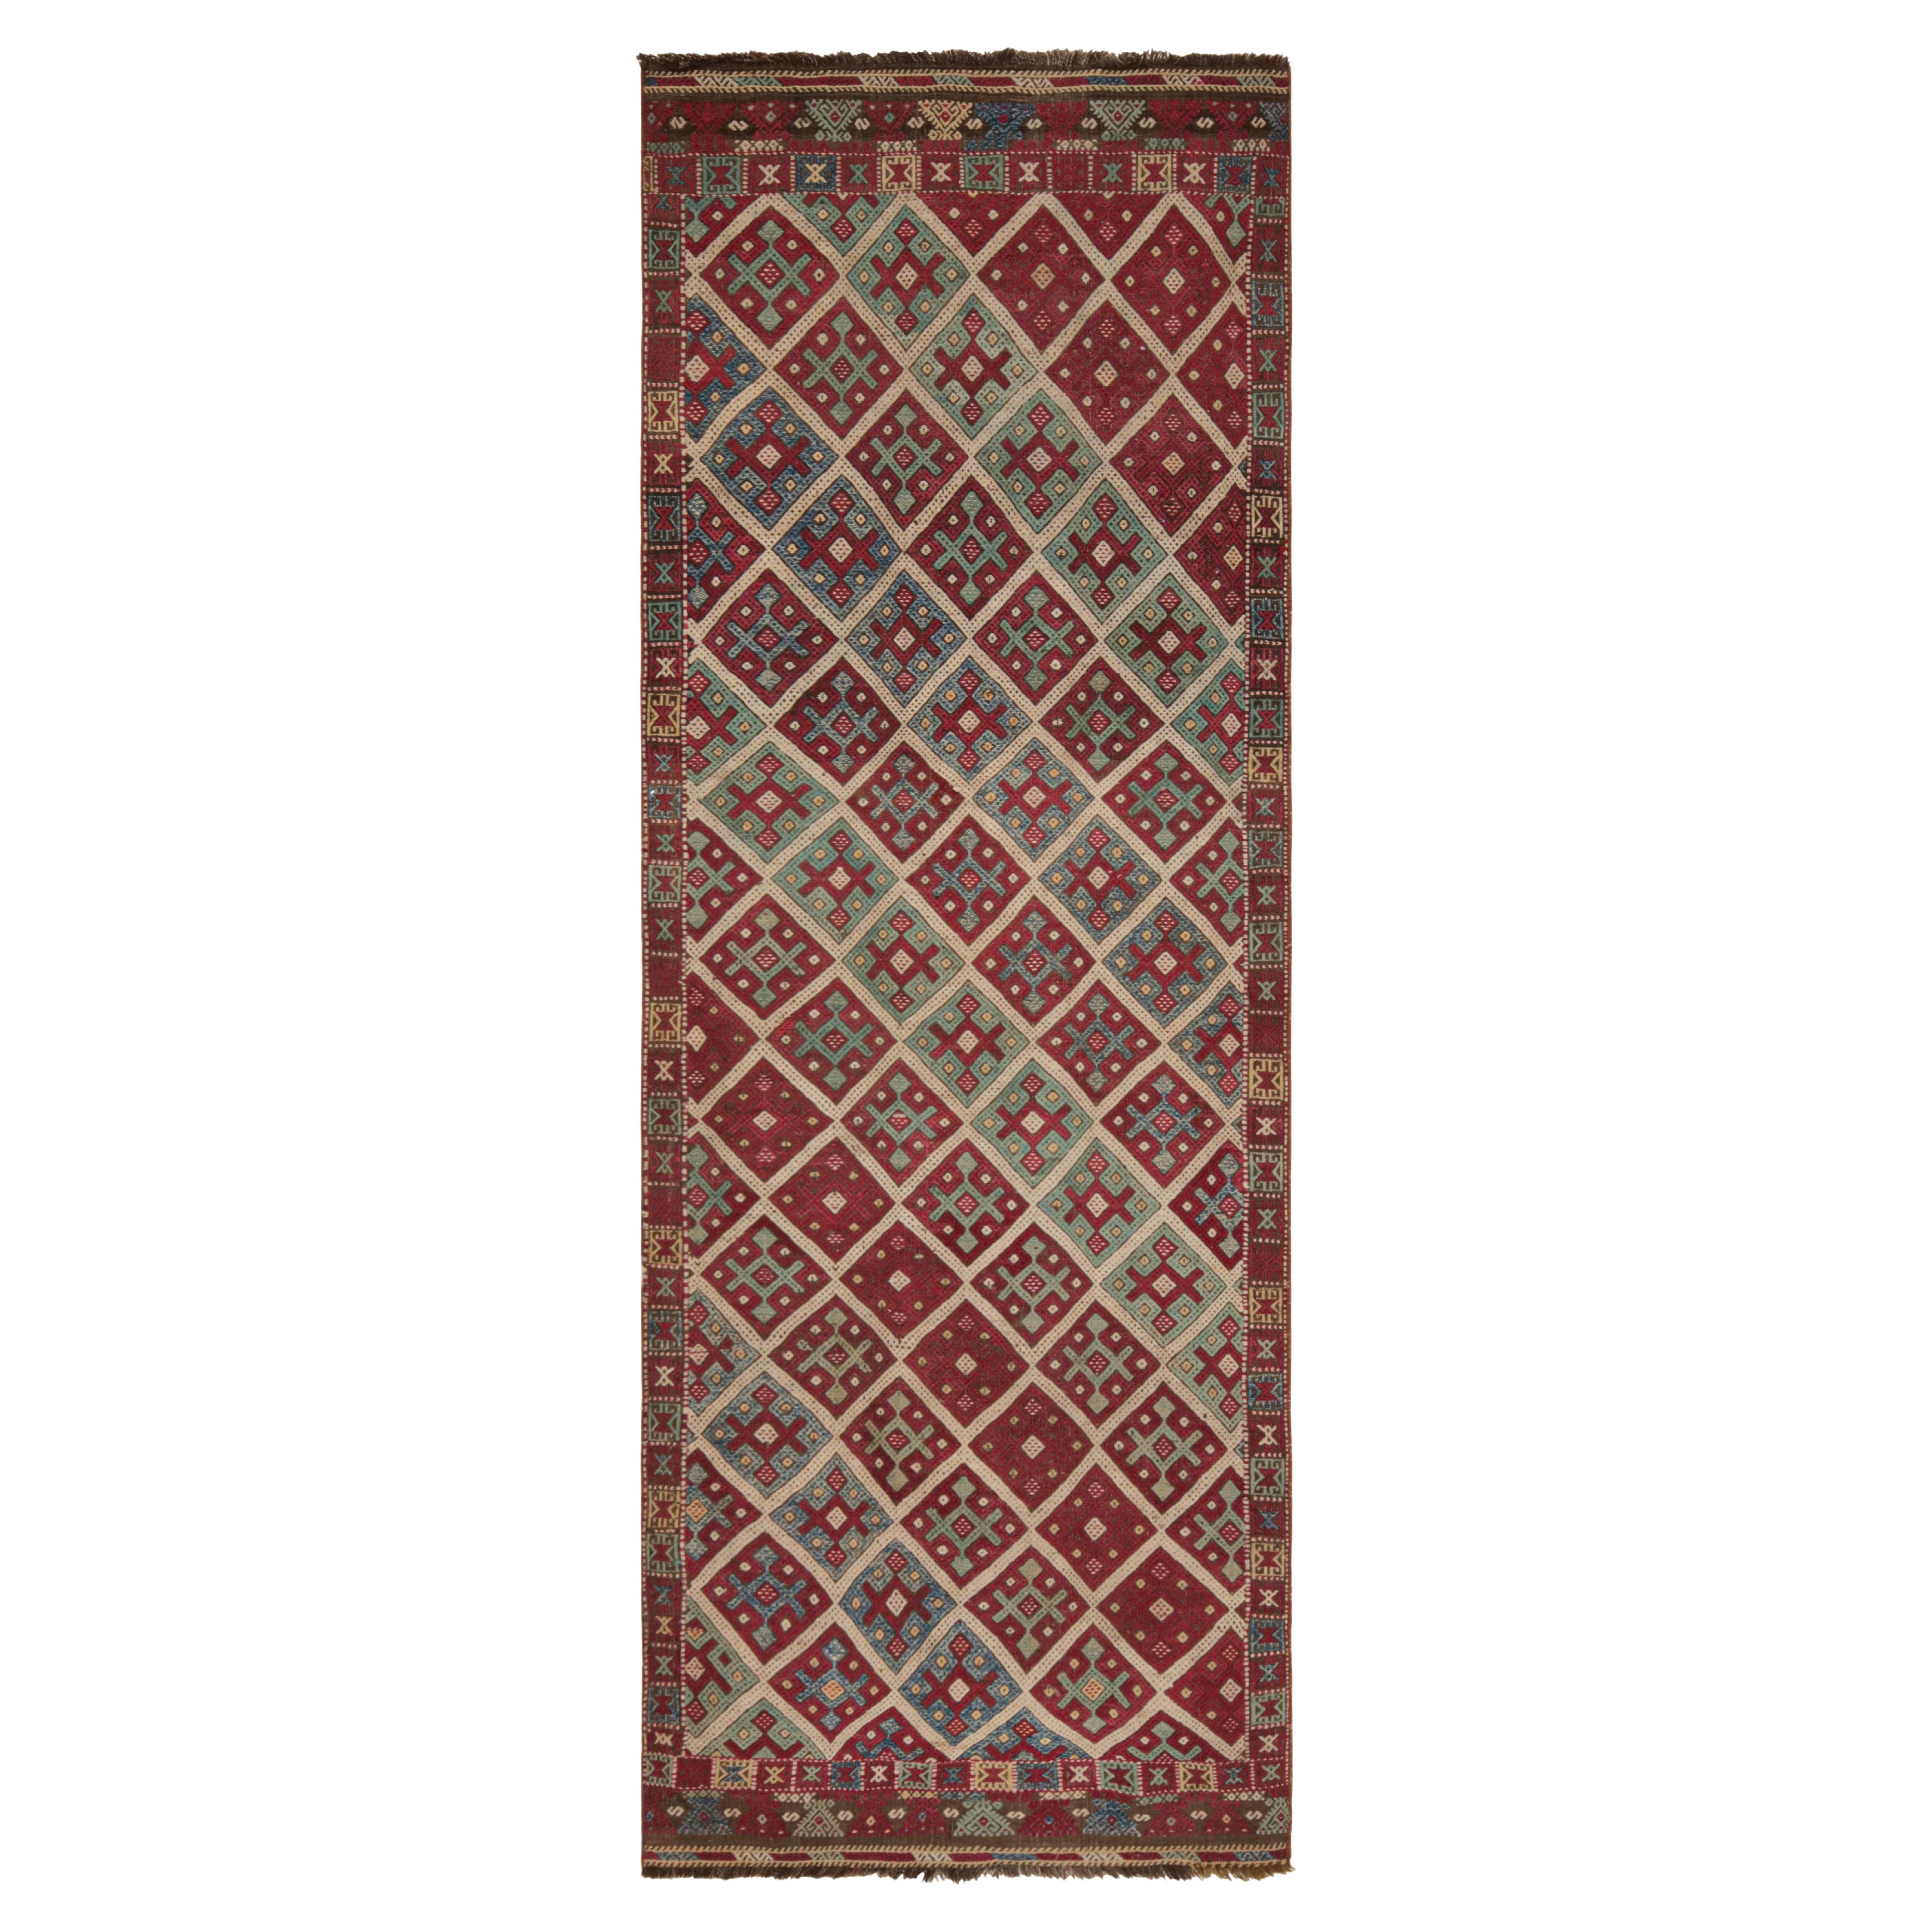 Antique Turkish Transitional Red and Blue Wool Kilim by Rug & Kilim For Sale